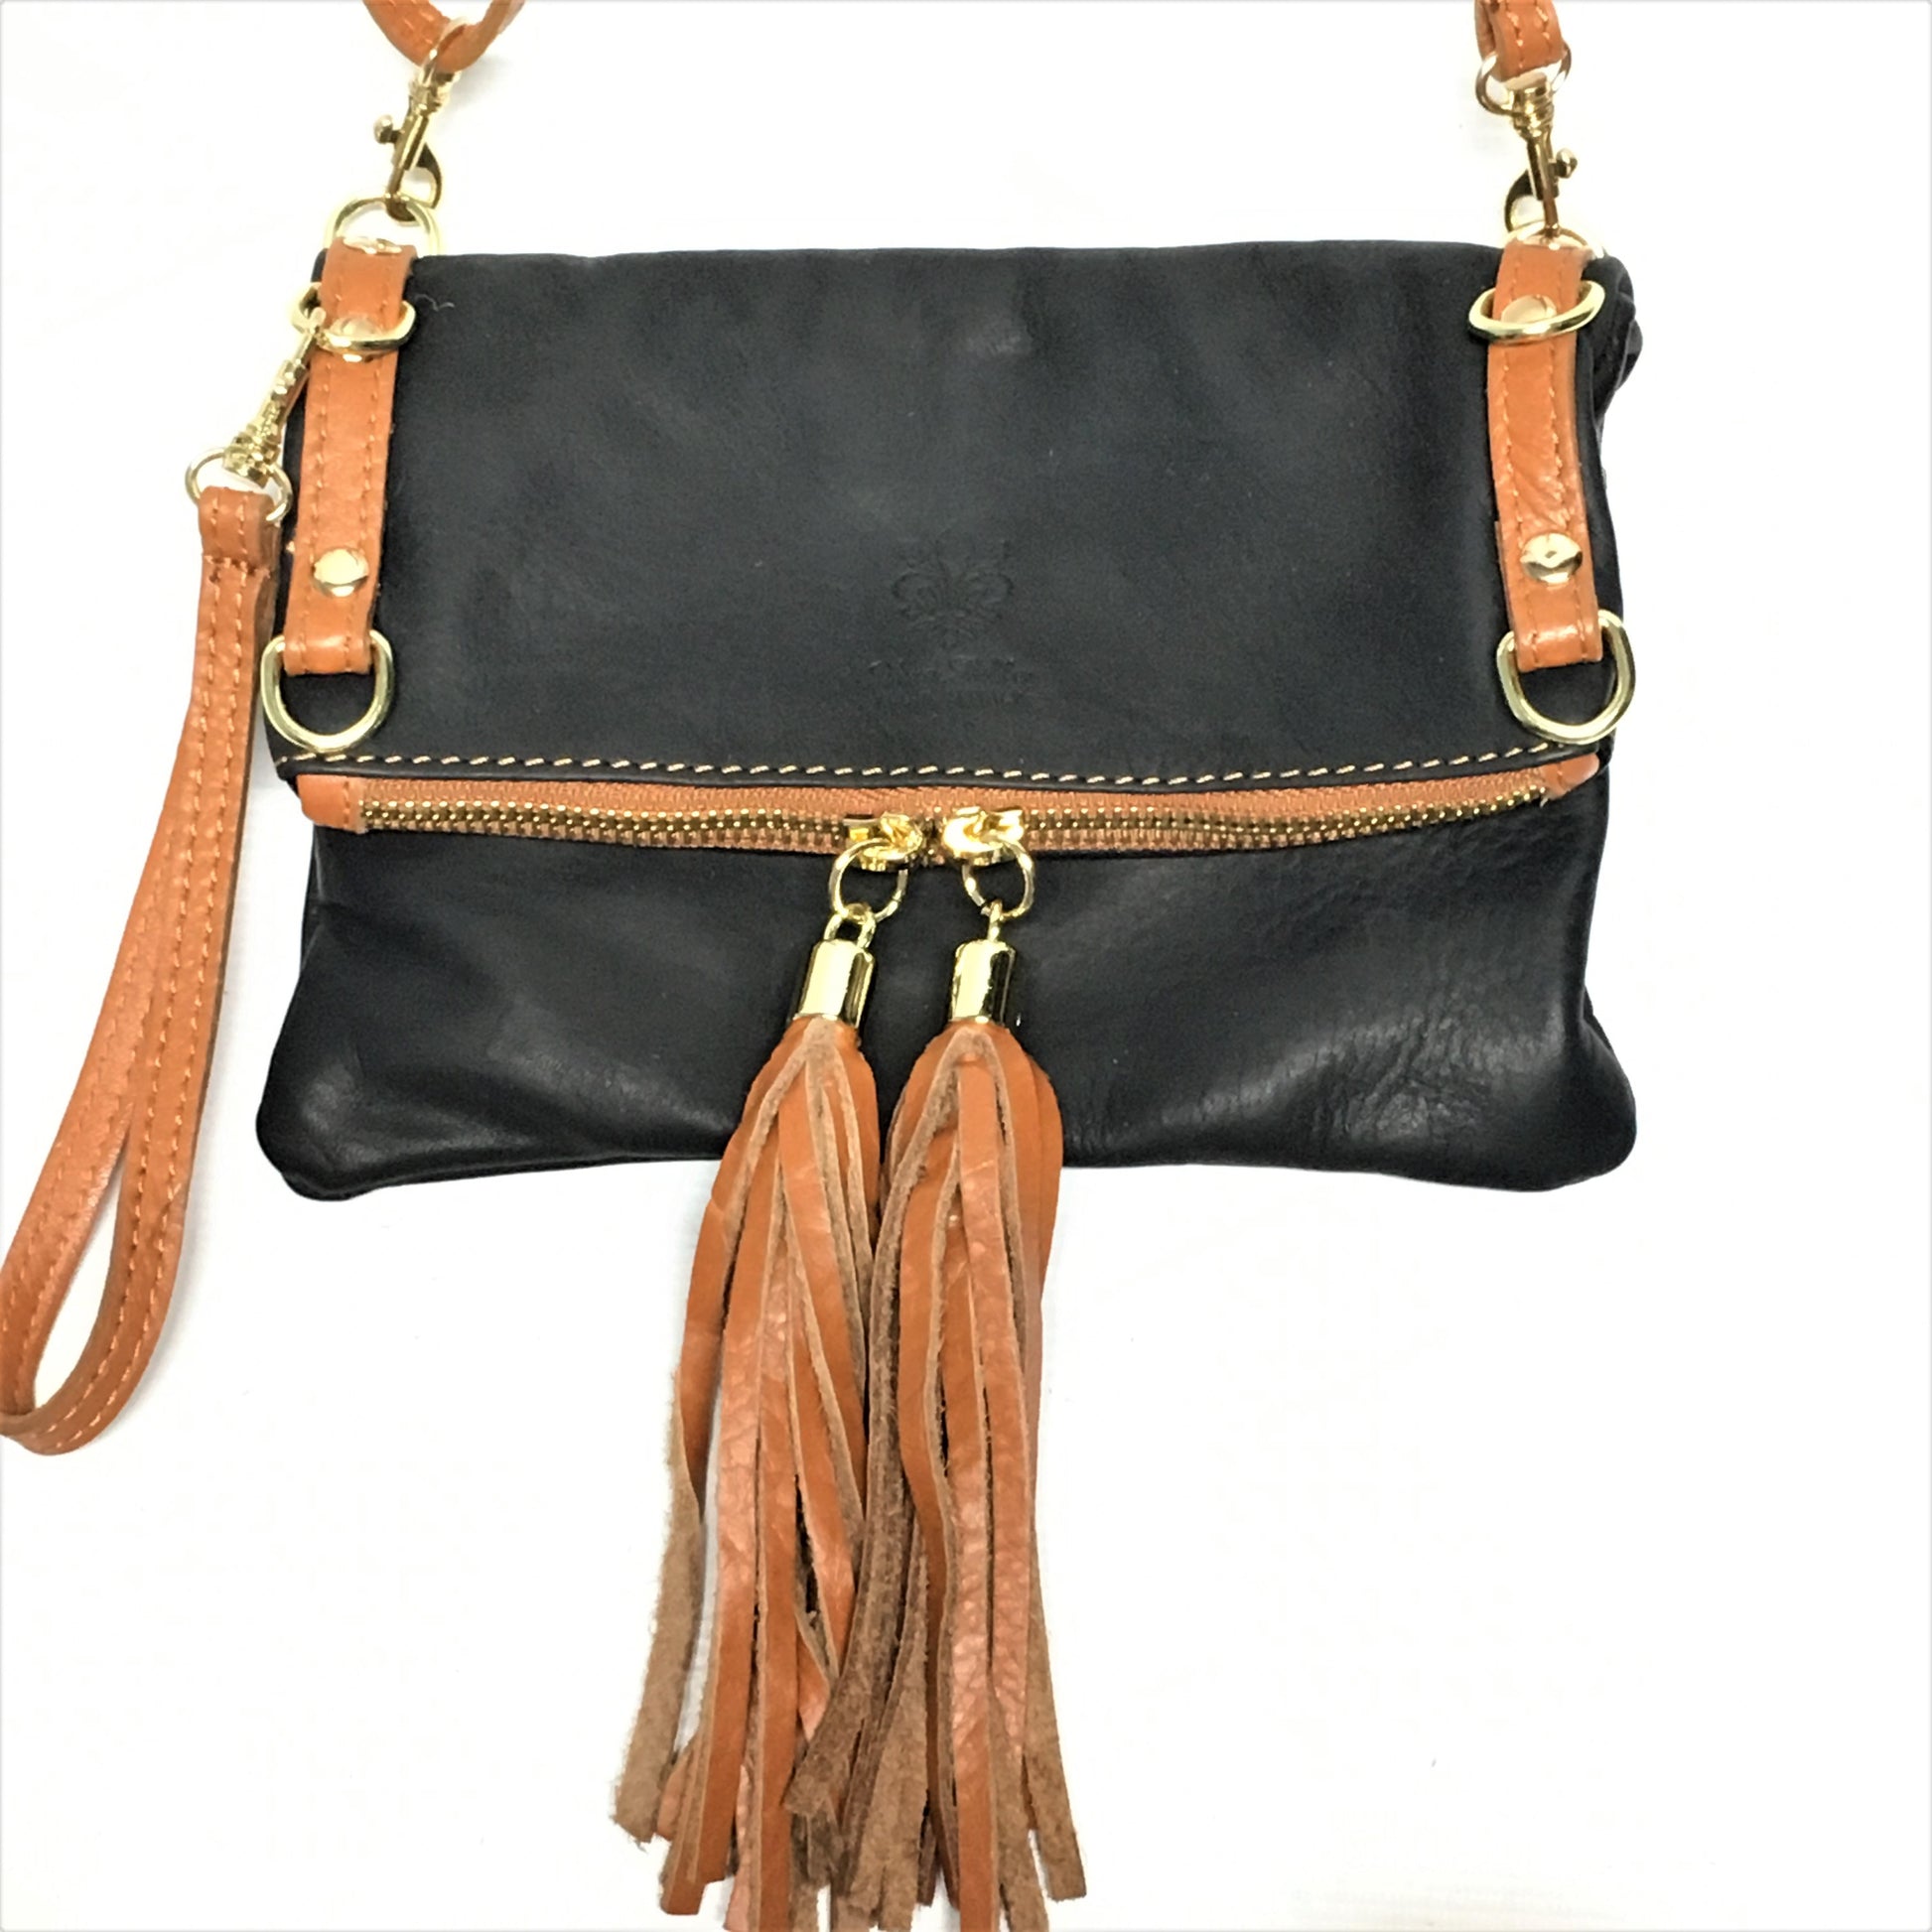 Italian Leather Crossbody Clutch Purse with straight flap and two tassels - Infinity Headbands by Ambrosia Designs